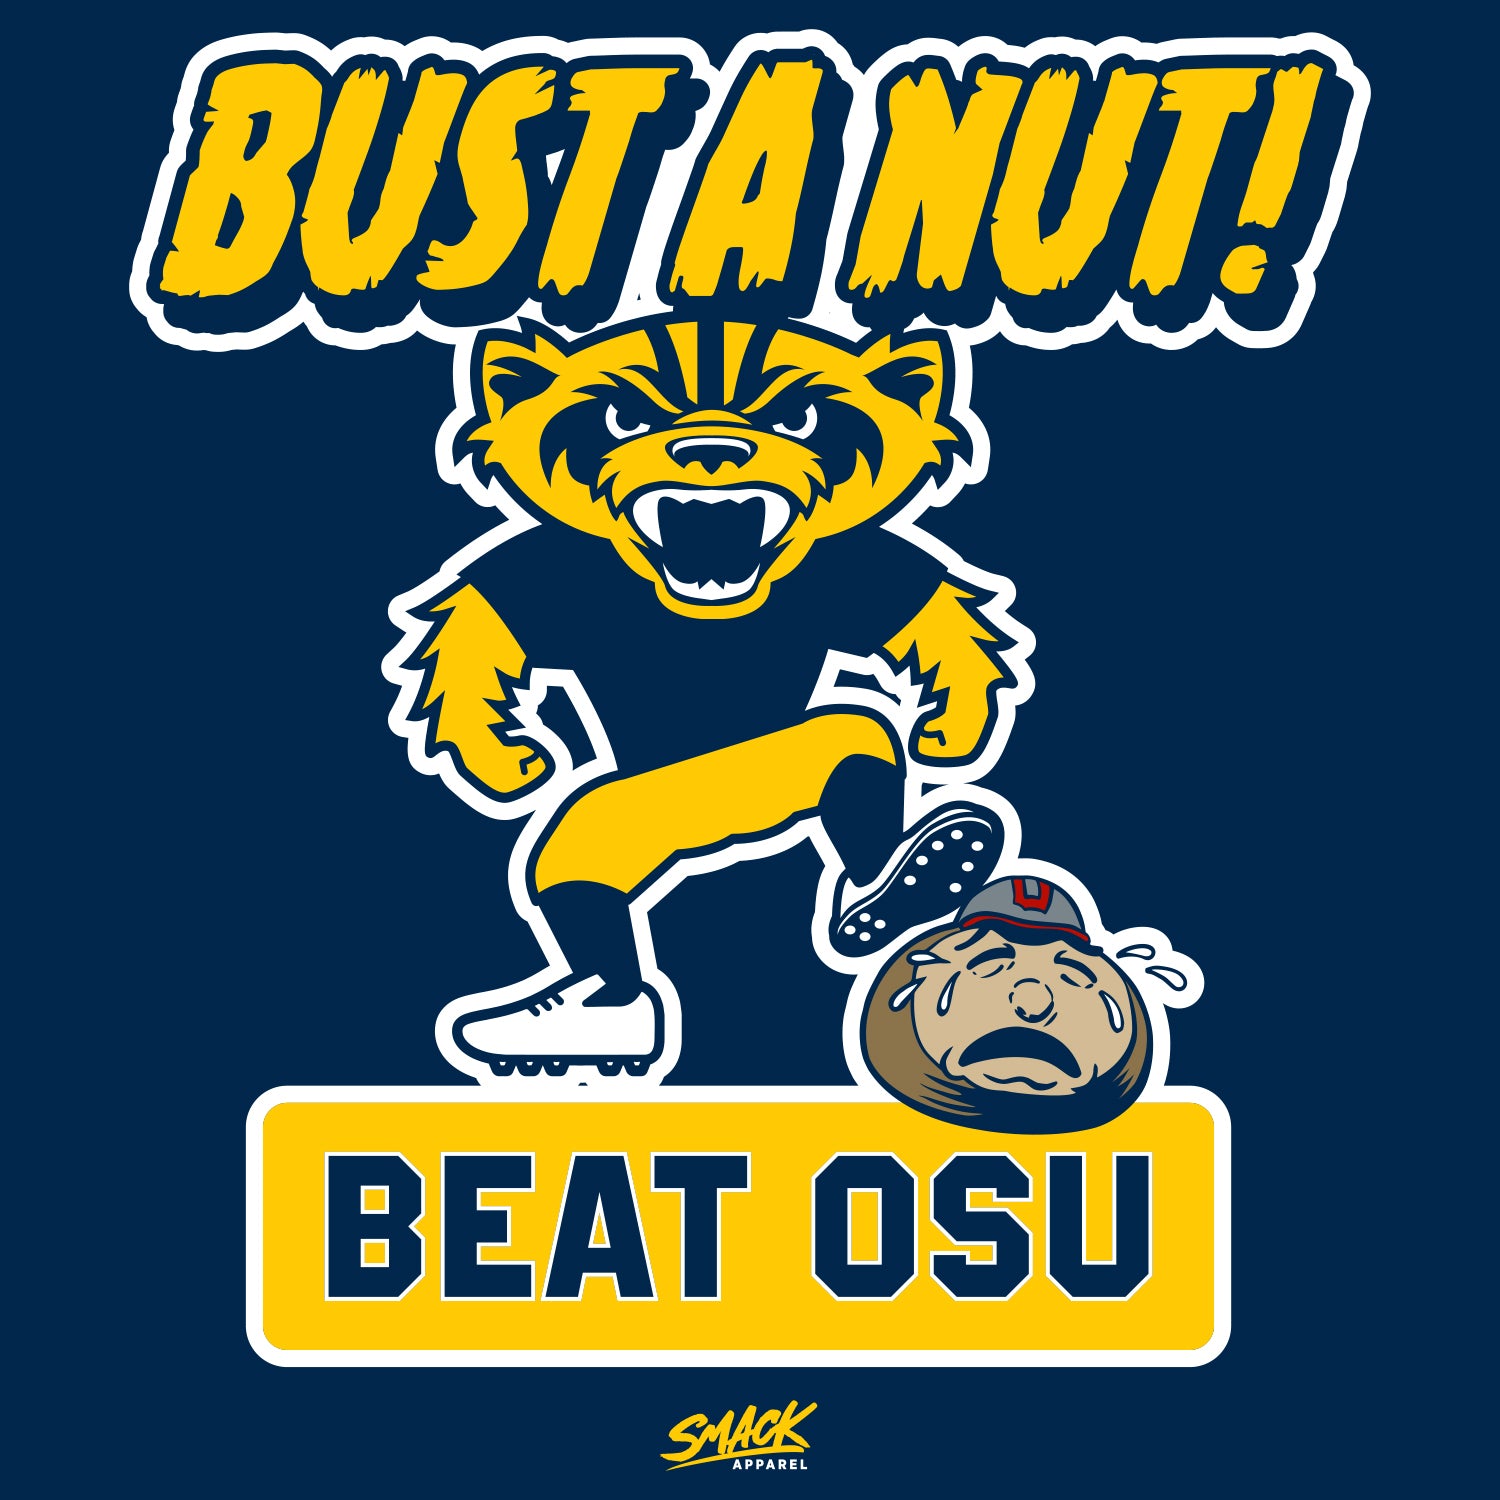 Bust a Nut! Beat Ohio State (Blue/Maize) T-Shirt for Michigan College –  Smack Apparel